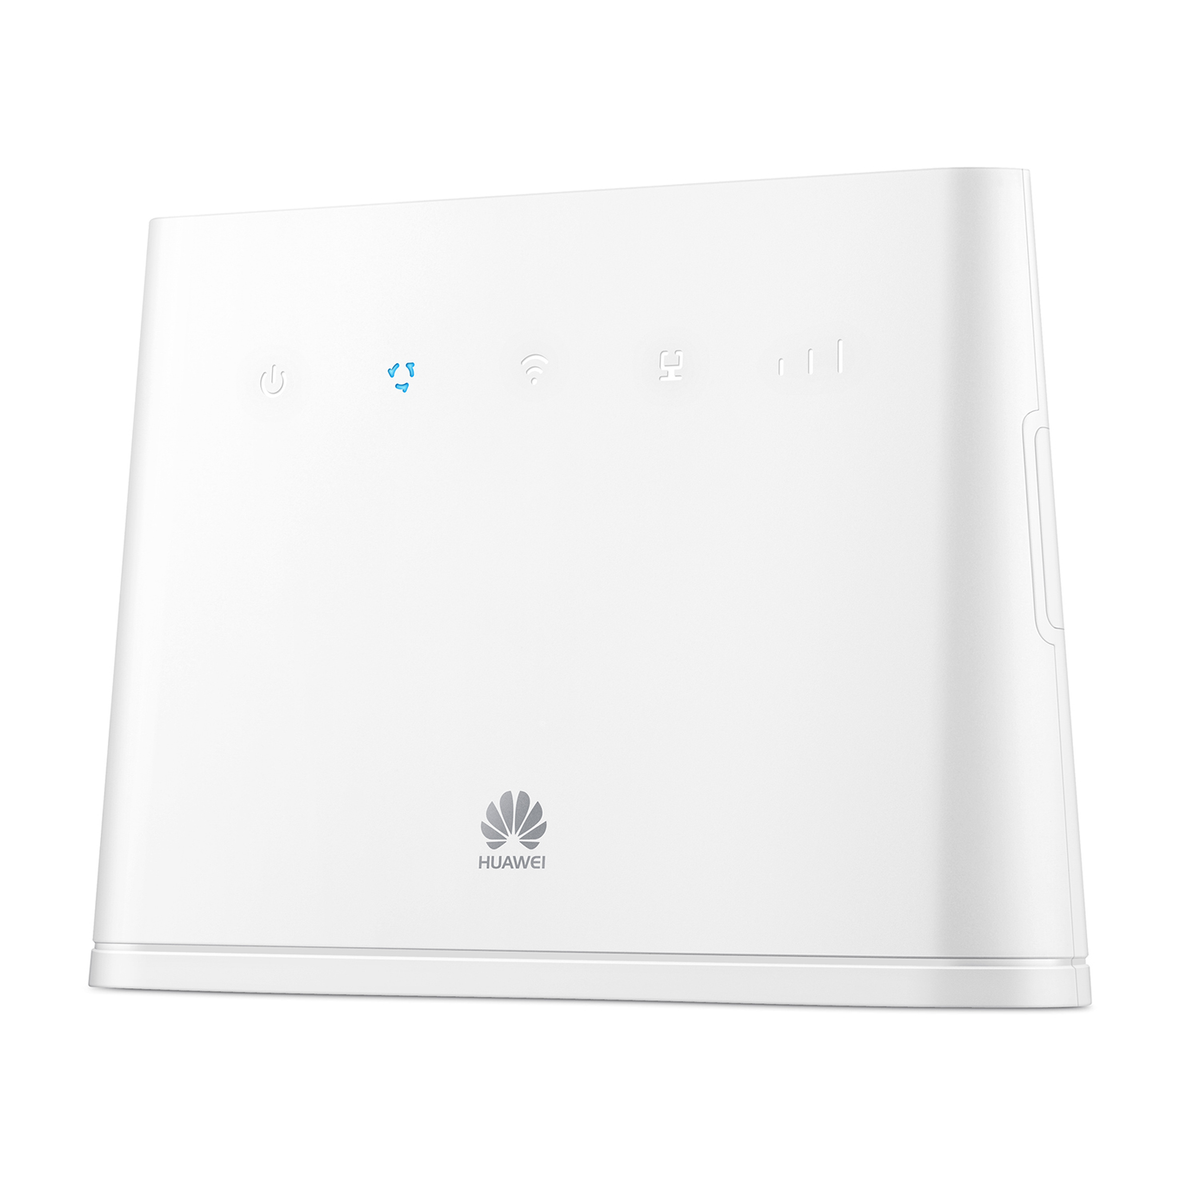 HUAWEI B311S-221 STAT LTE 150MBPS 150 DL 4G CAT4 ROUTER WHITE Router Mbit/s